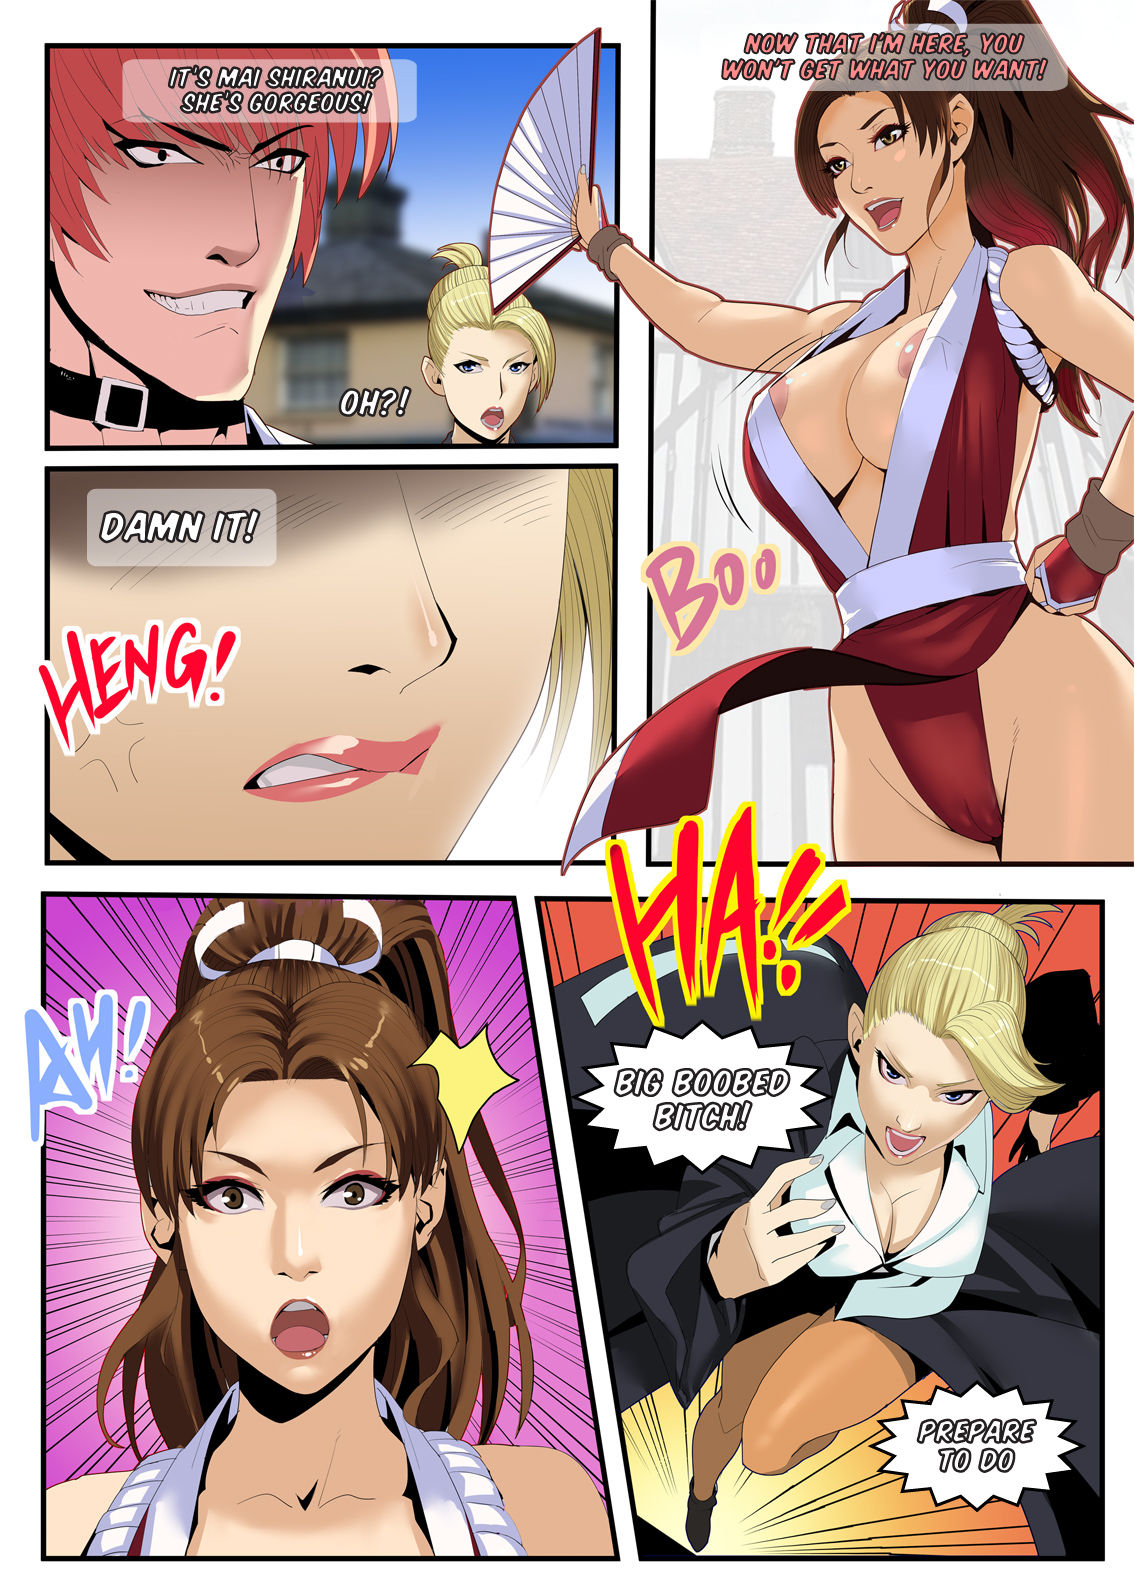 [chunlieater] The Lust of Mai Shiranui (King of Fighters) [English] [Yorkchoi & Twist] page 6 full